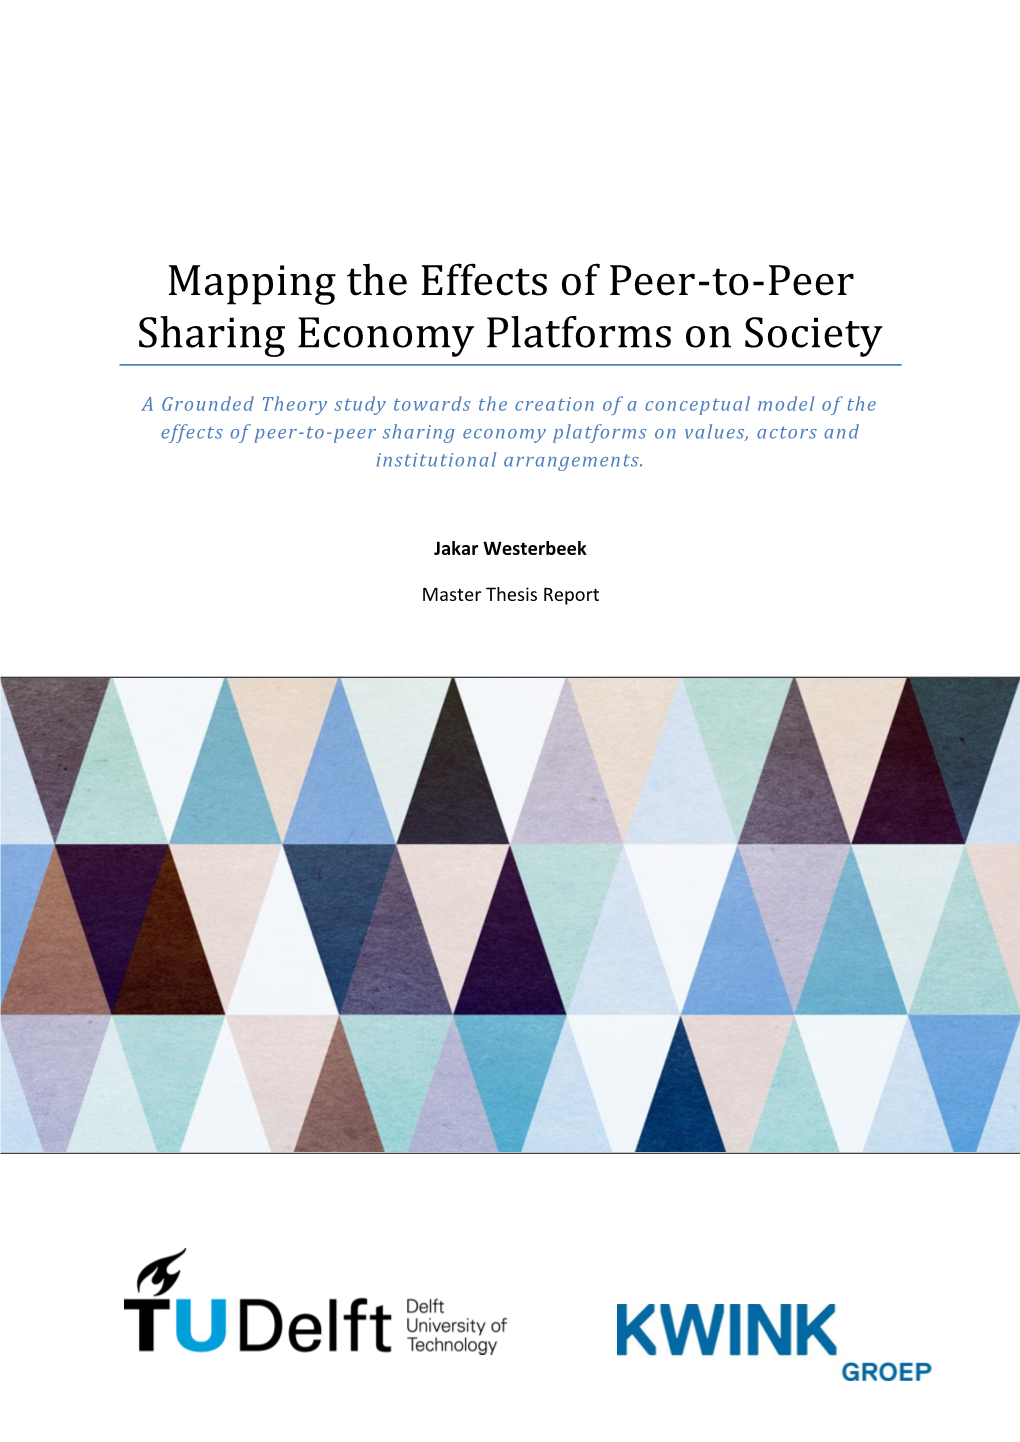 Mapping the Effects of Peer-To-Peer Sharing Economy Platforms on Society